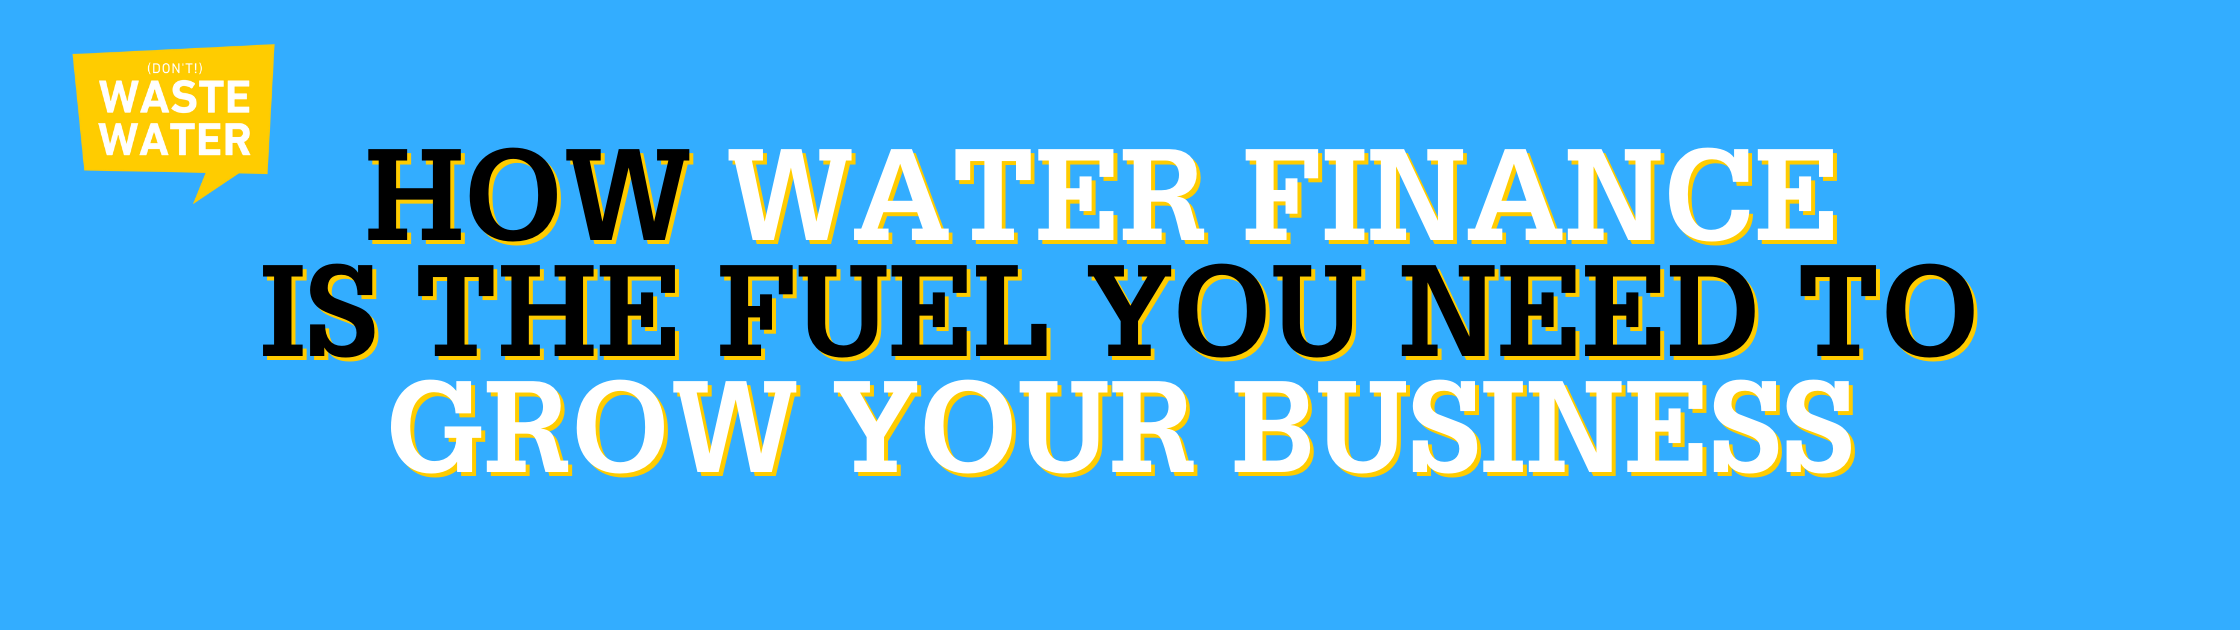 How Water Finance is the Fuel you need to Grow your Business